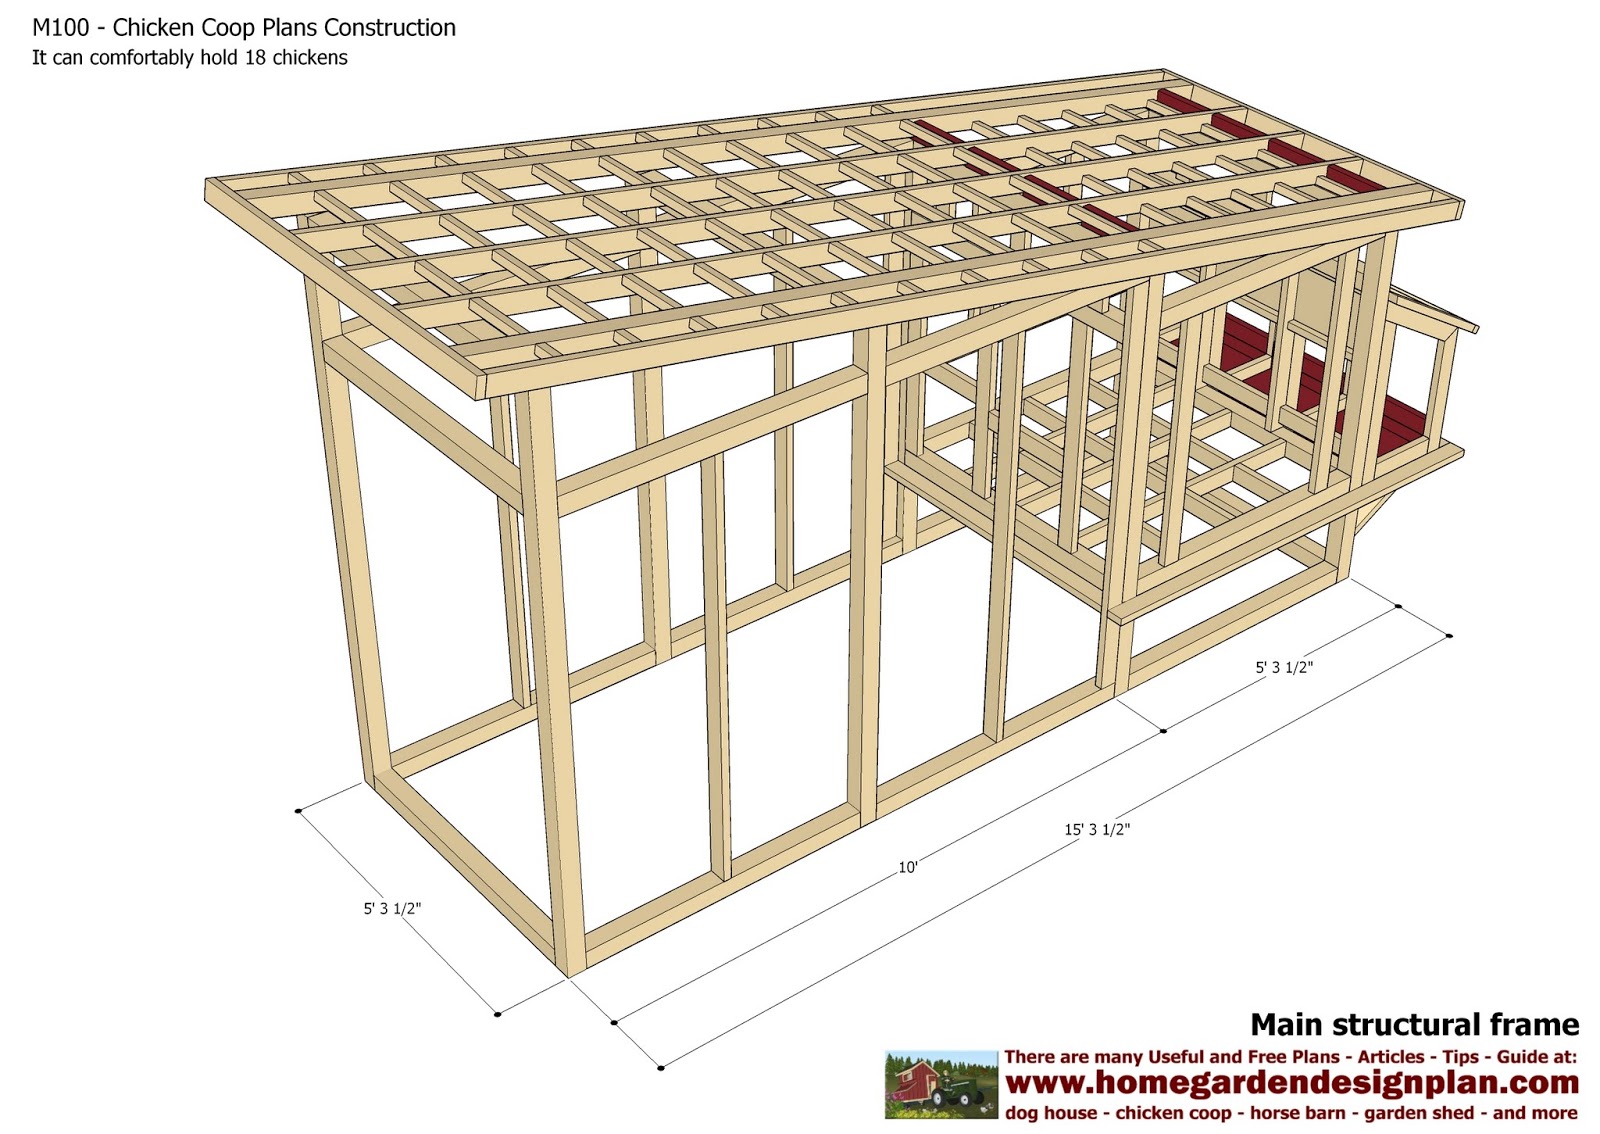 How to build a chicken coop com ~ Build small chicken coop